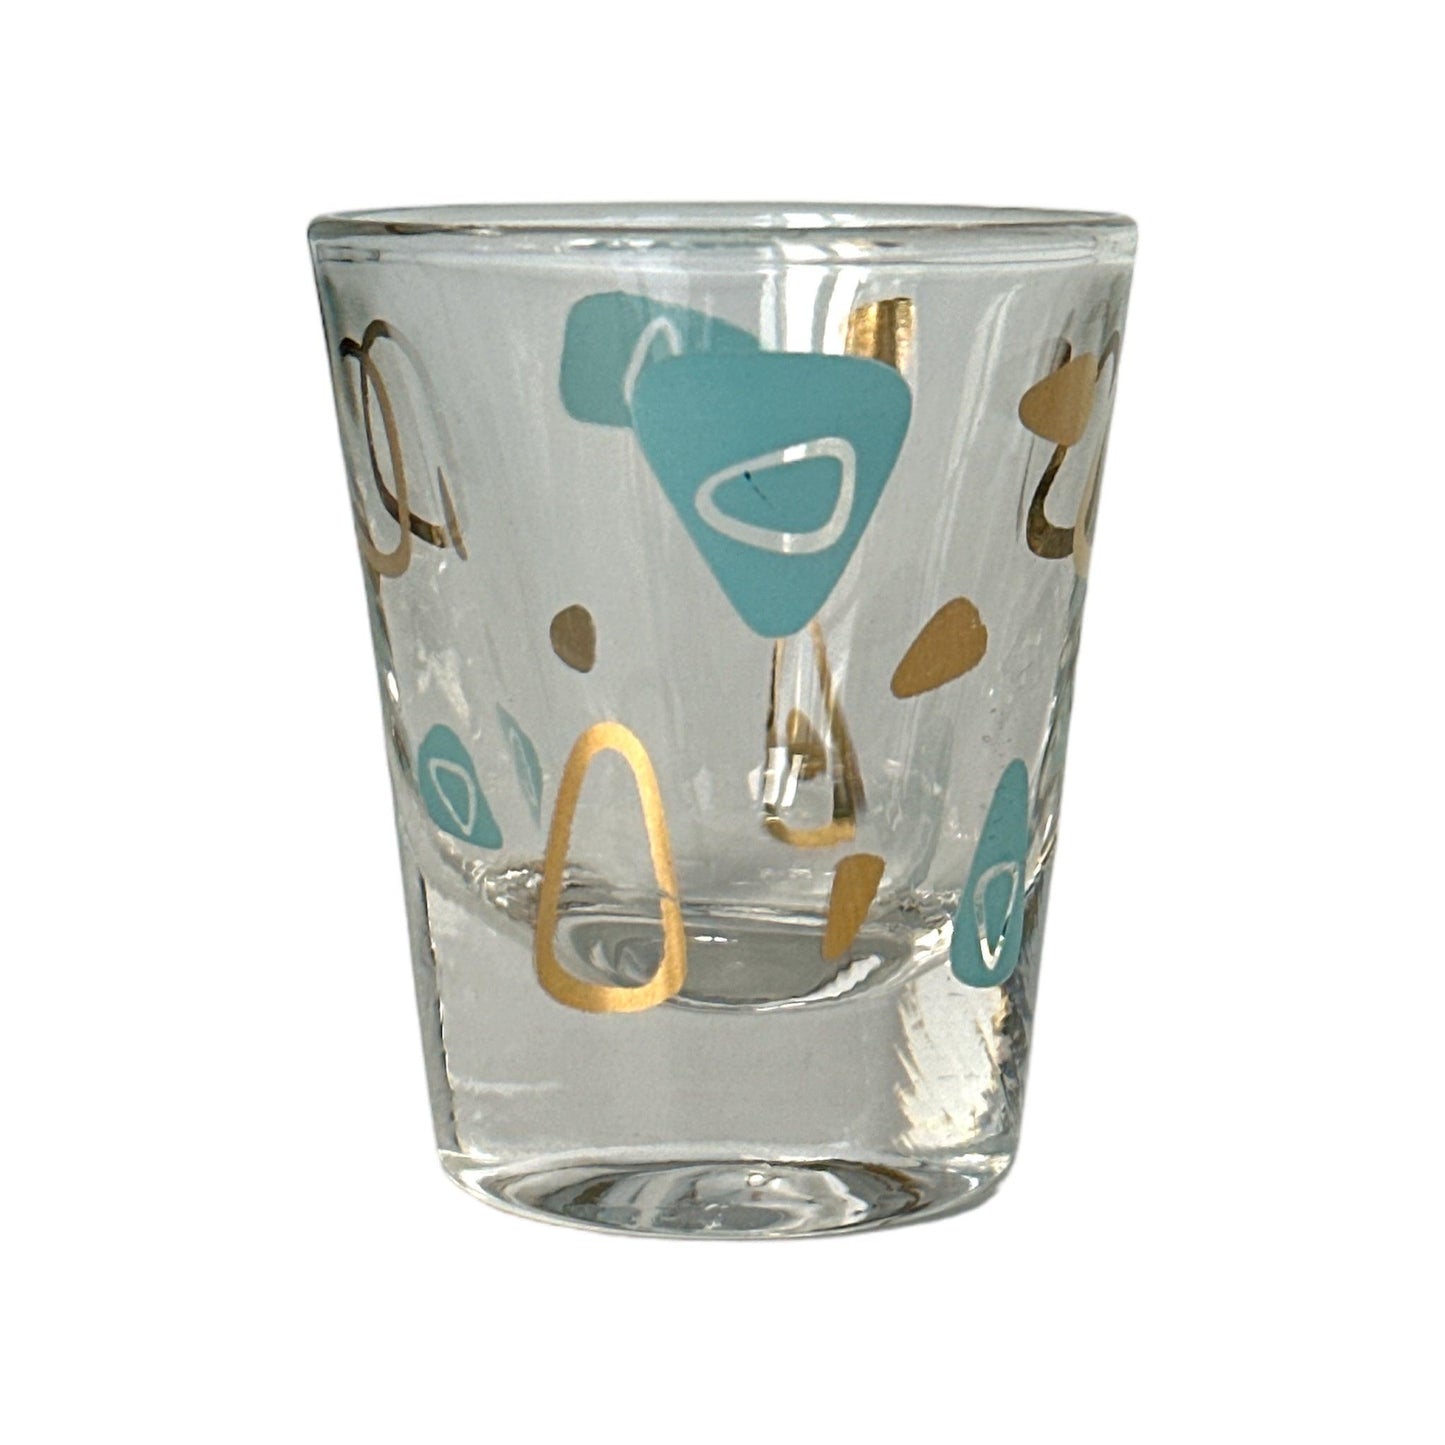 Federal Glass Mid-Century Turquoise Gold Amoeba Boomerang Atomic Shot Glass - Vintage Collectible Cocktail Glass